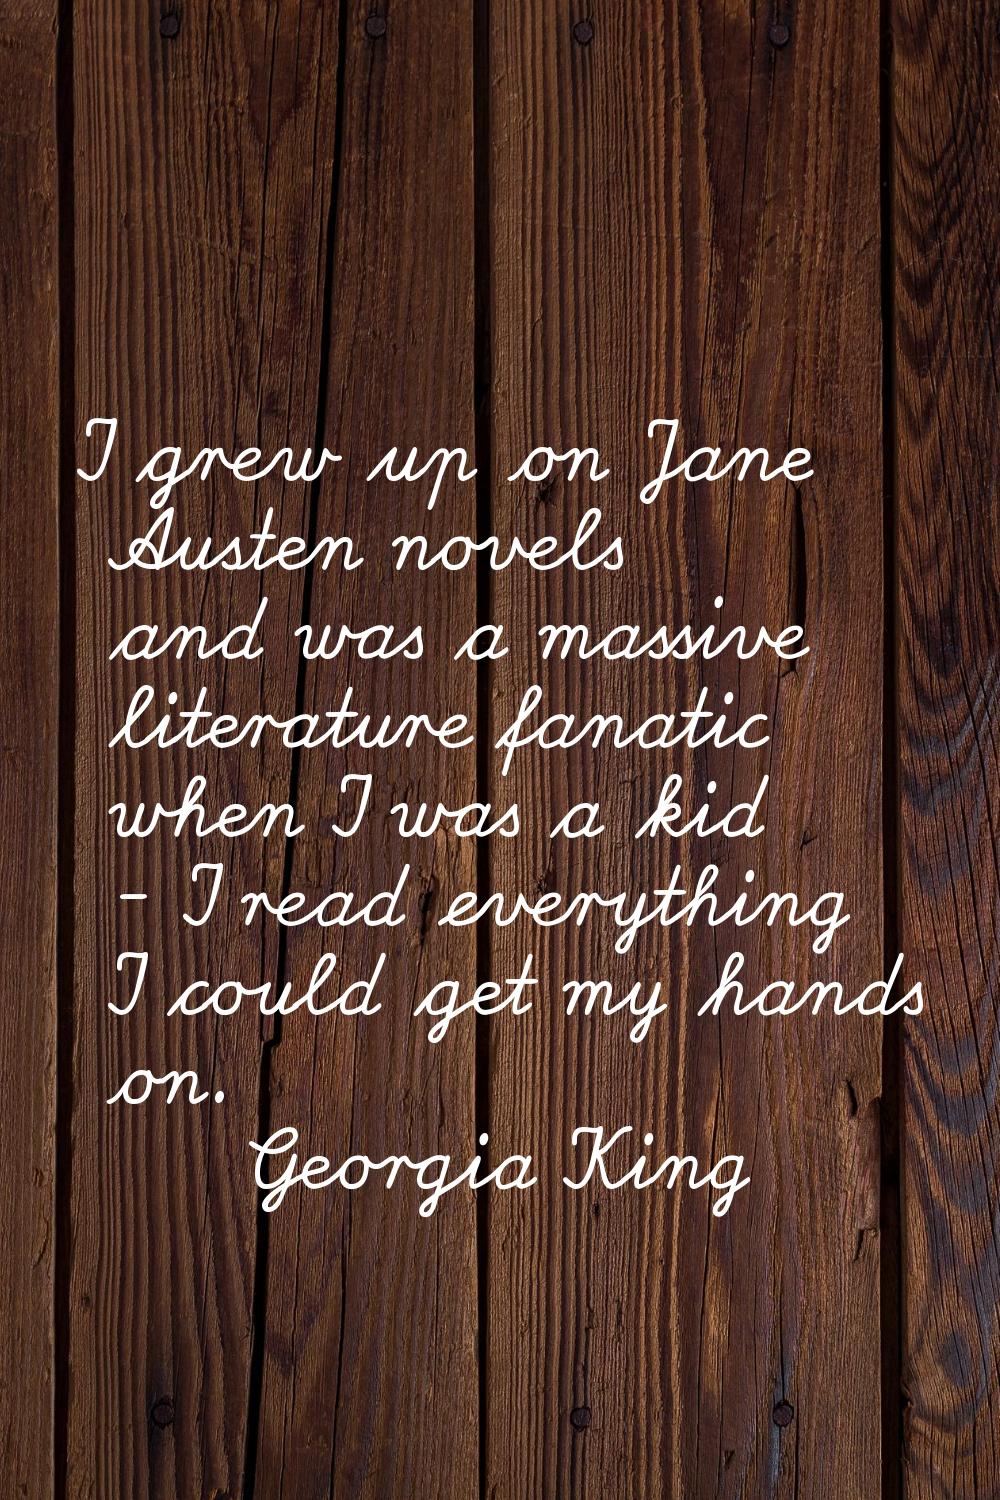 I grew up on Jane Austen novels and was a massive literature fanatic when I was a kid - I read ever